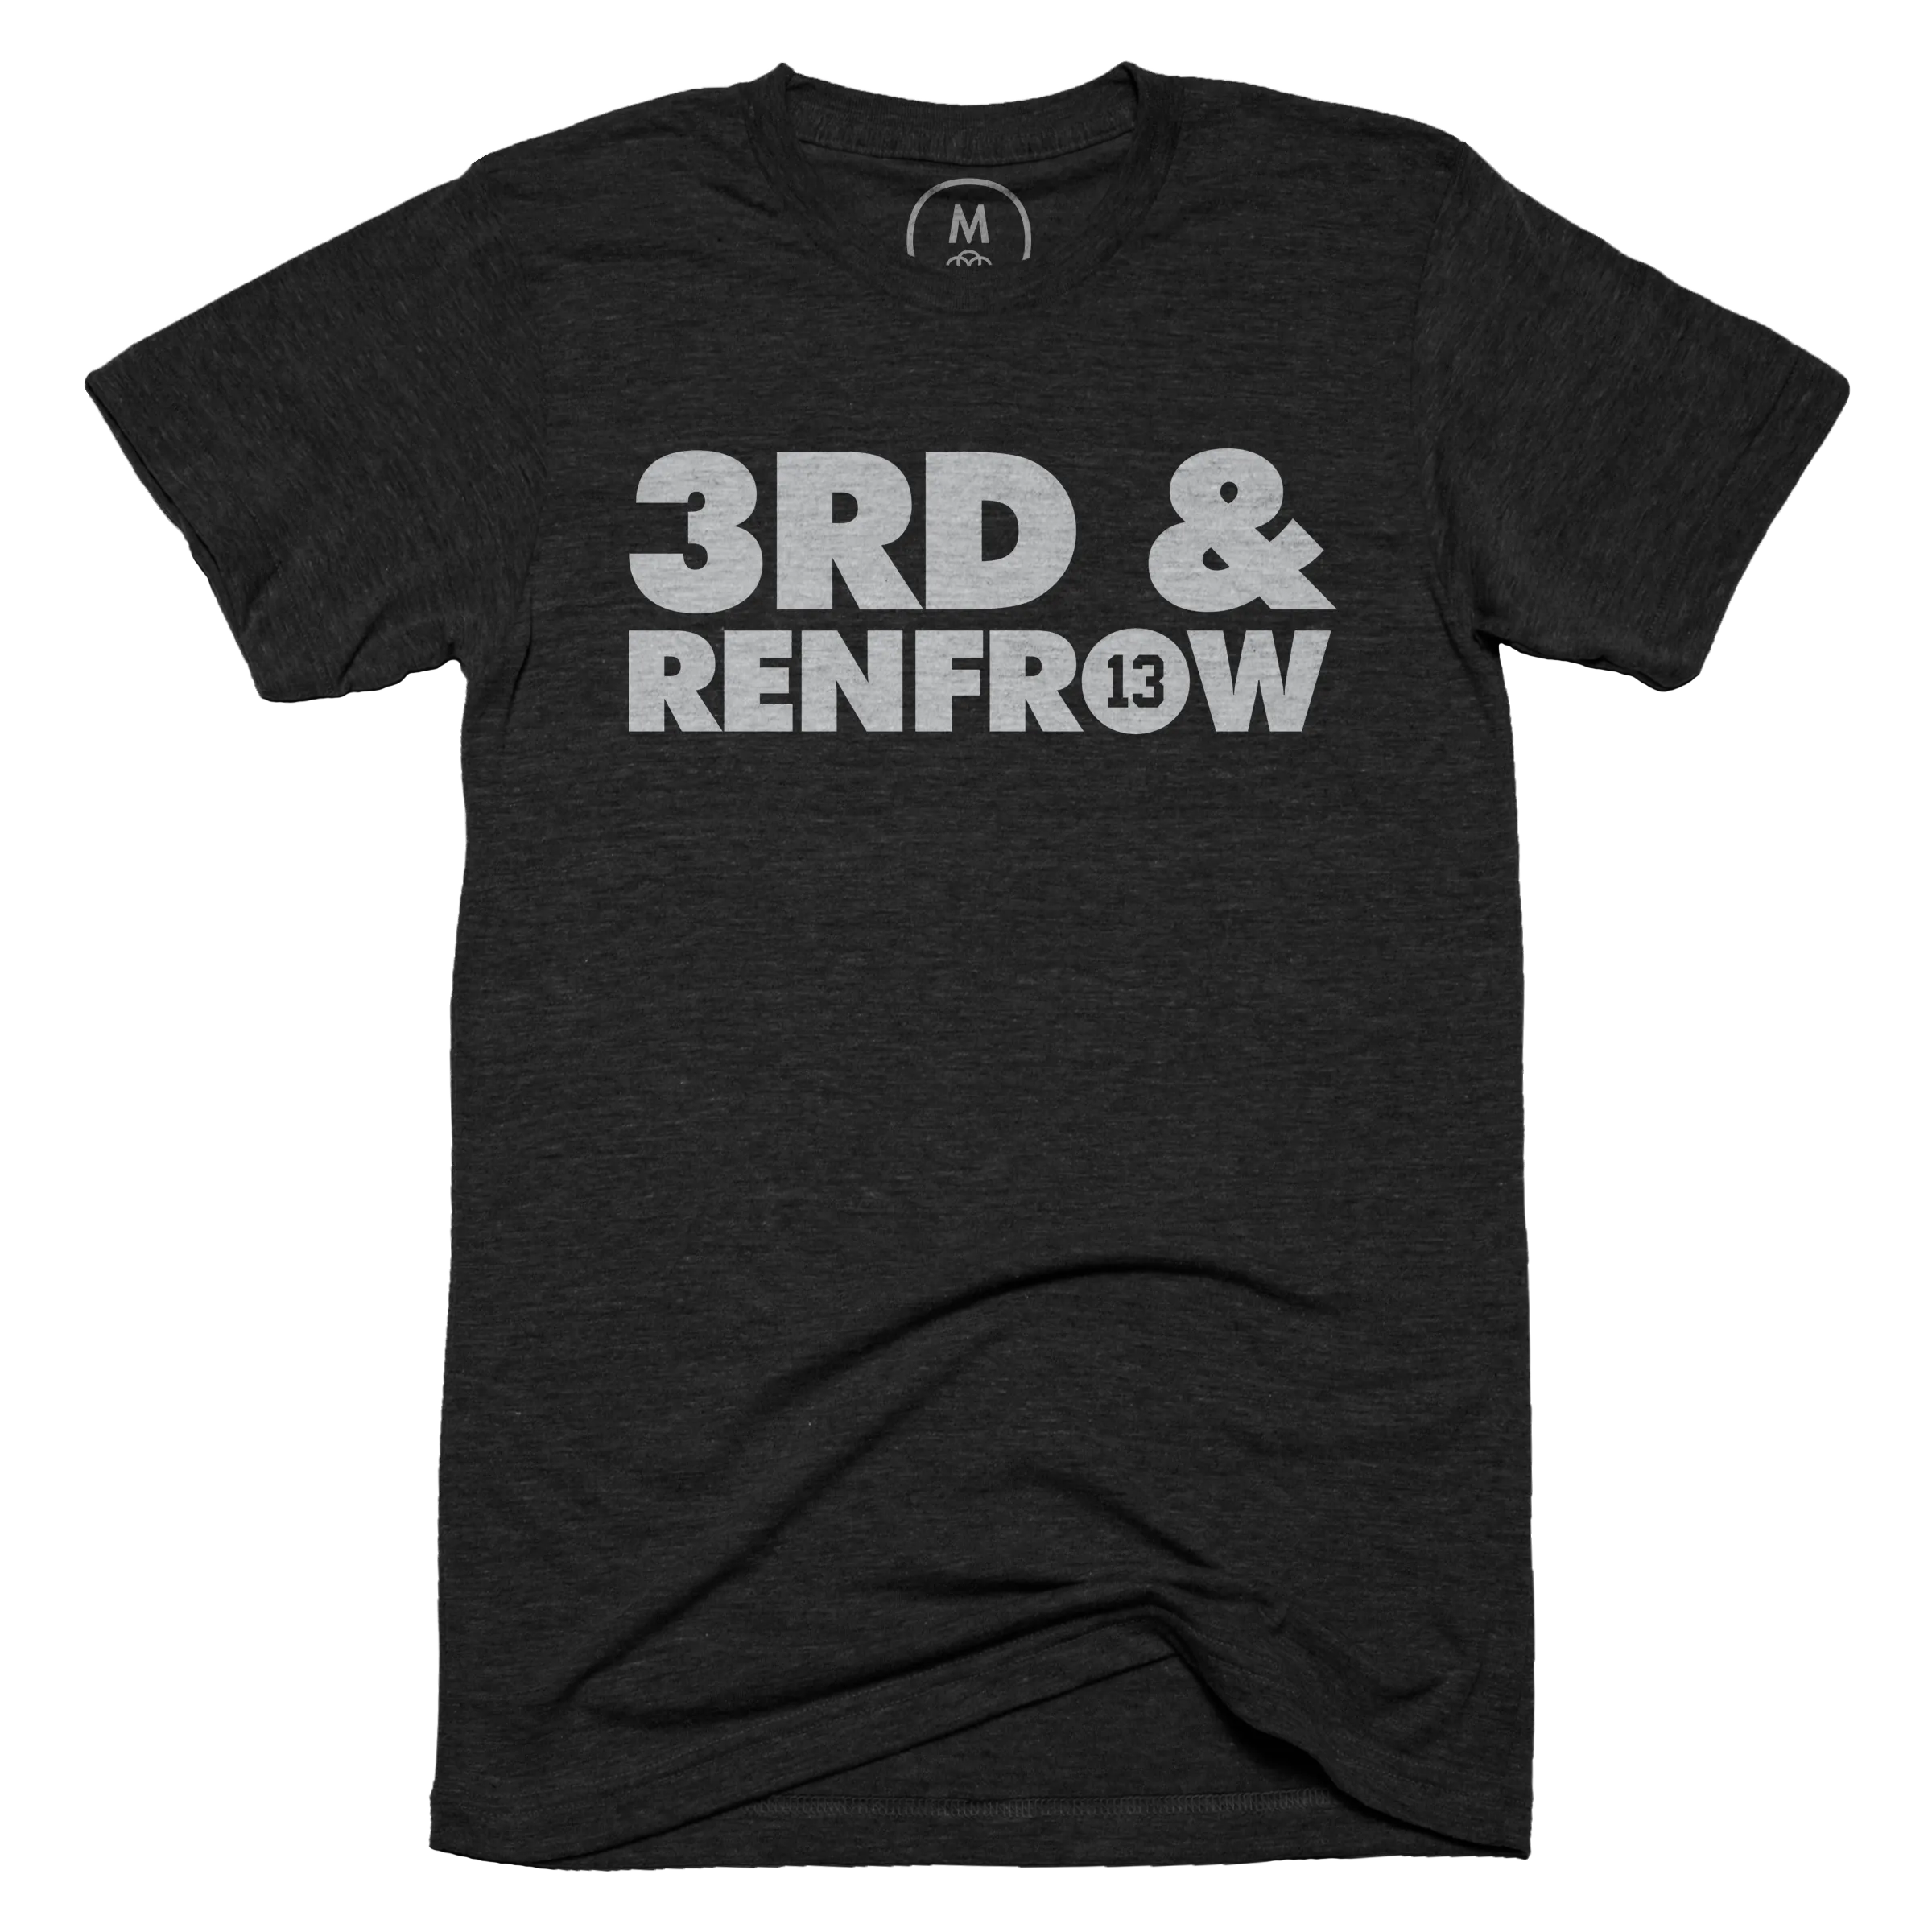 3rd & Renfrow” graphic tee, pullover hoodie, tank, and pullover crewneck by  T.J. Harley.